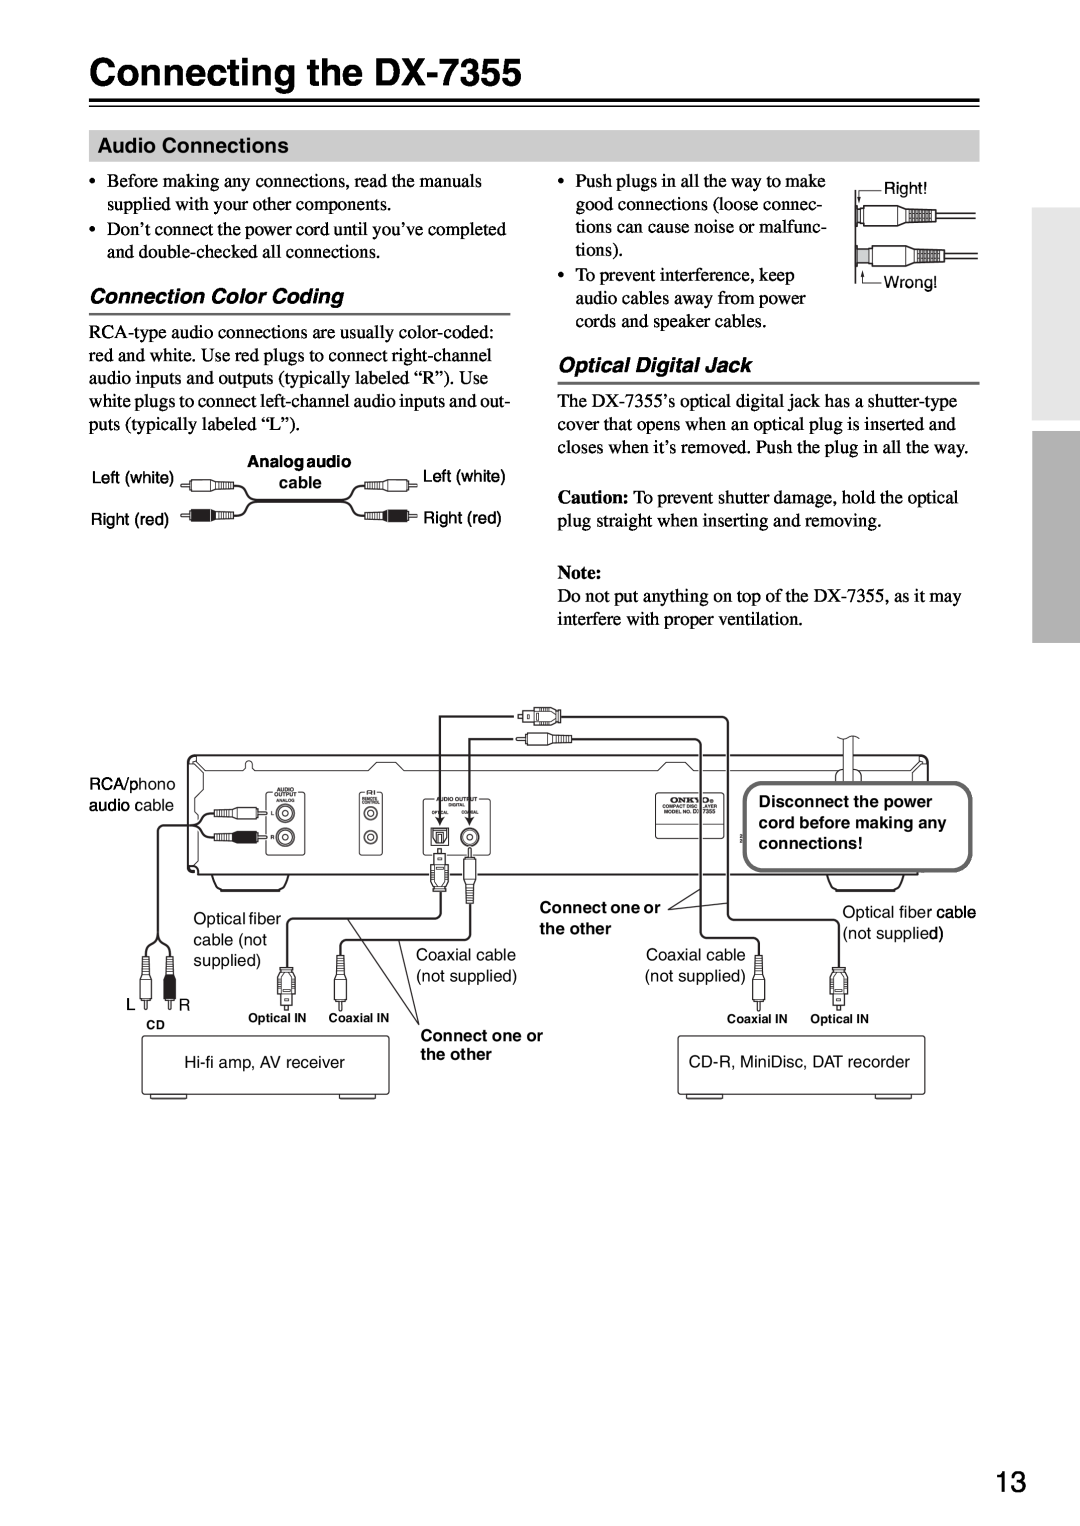 Onkyo instruction manual Connecting the DX-7355, Connection Color Coding, Optical Digital Jack, Audio Connections 